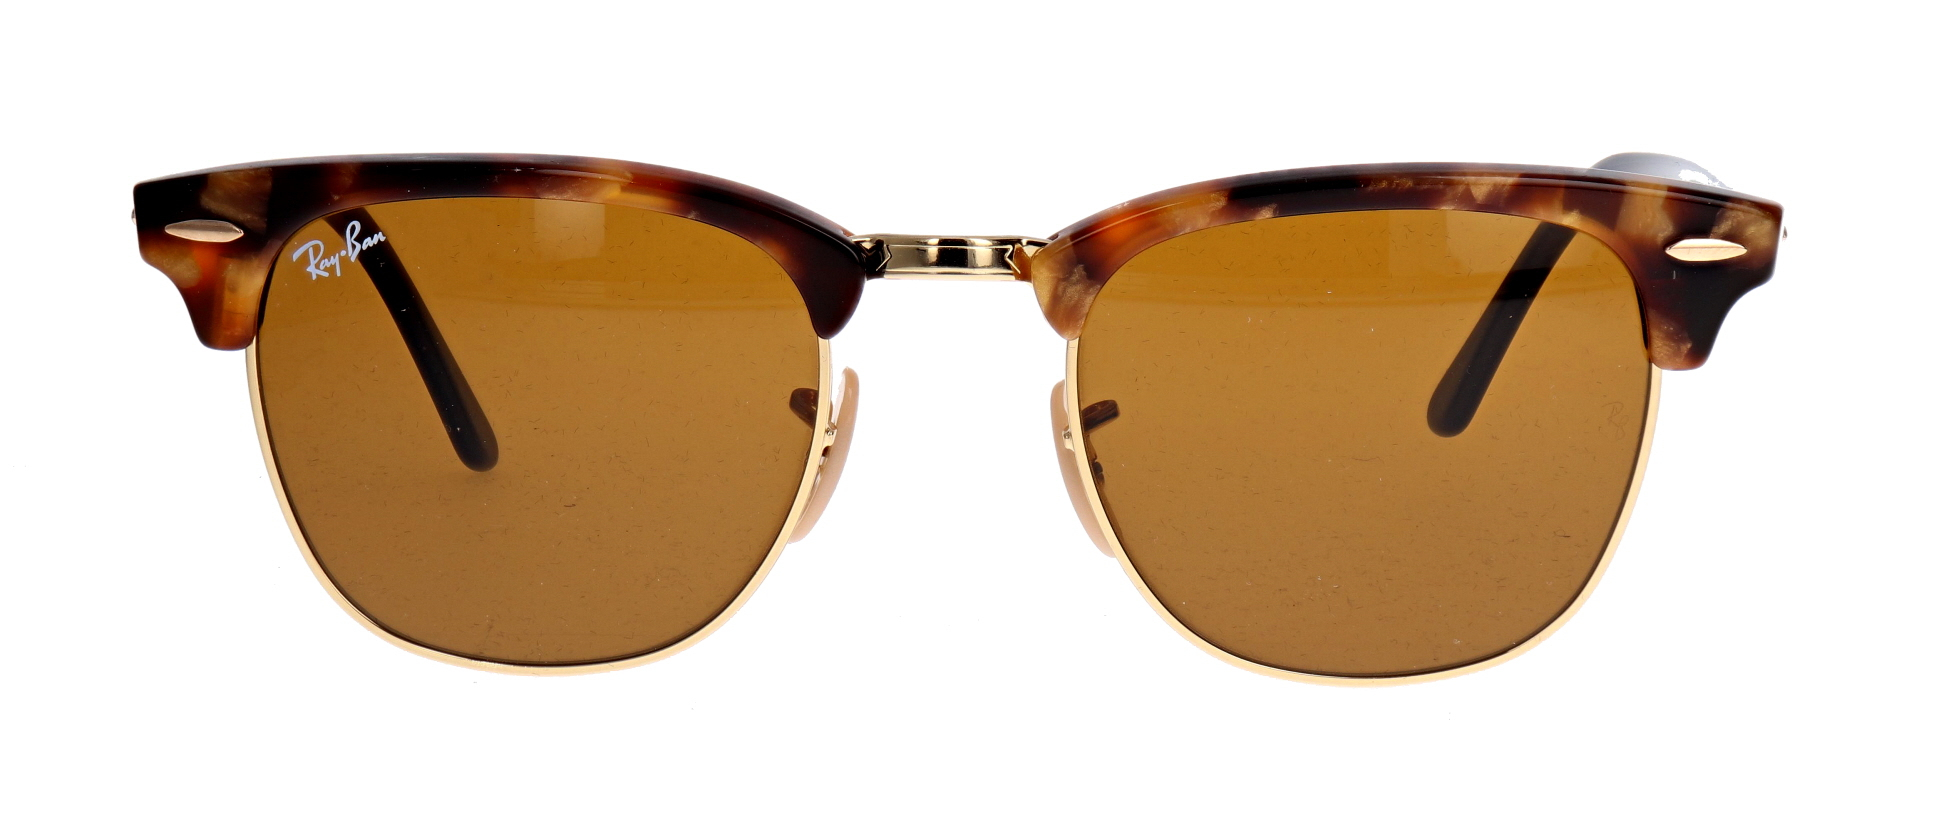 Ray Ban Clubmaster RB3016 1160